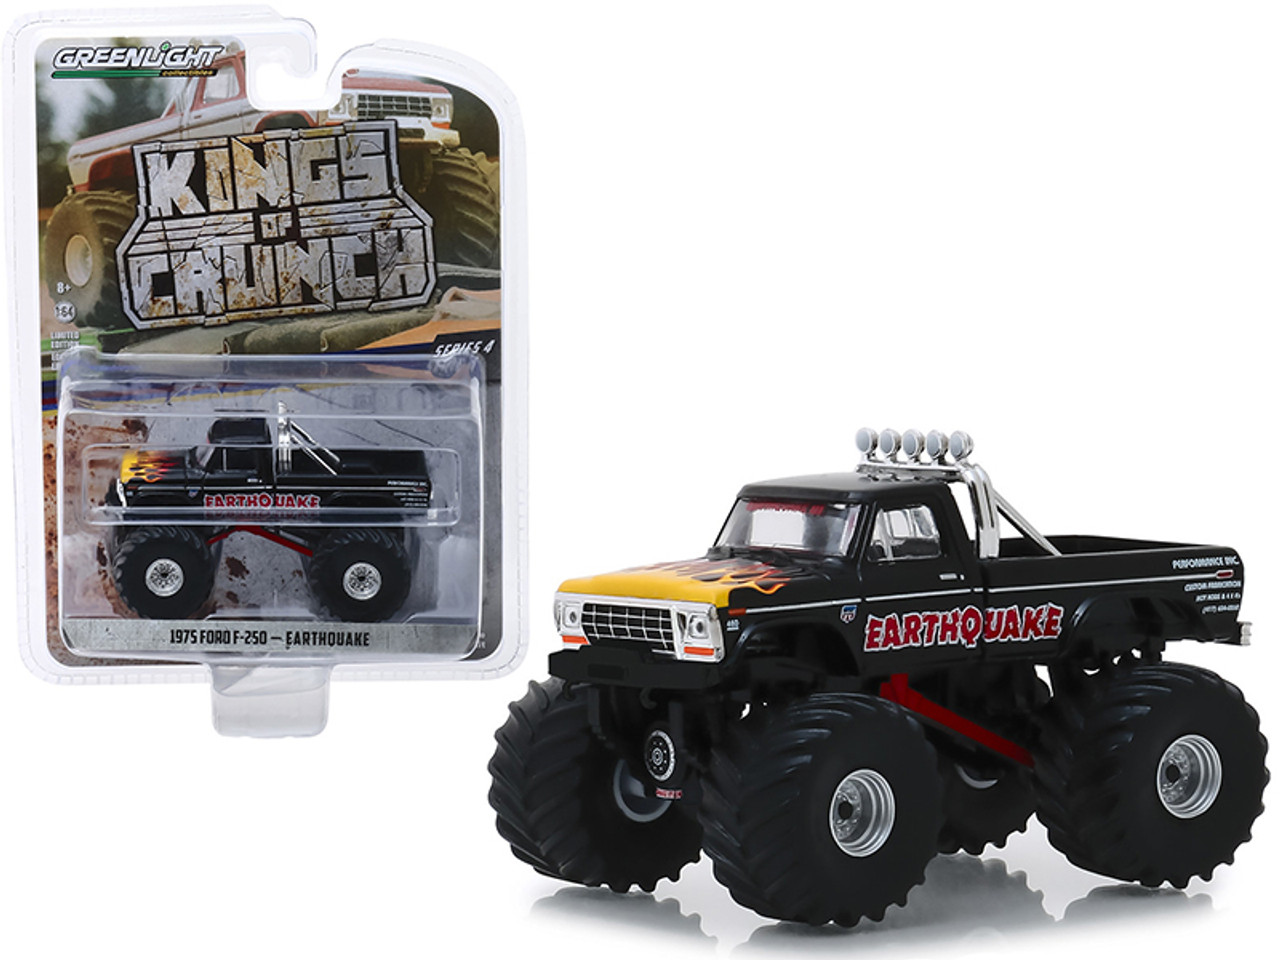 1975 Ford F-250 Monster Truck "Earthquake" Black with Flames "Kings of Crunch" Series 4 1/64 Diecast Model Car by Greenlight